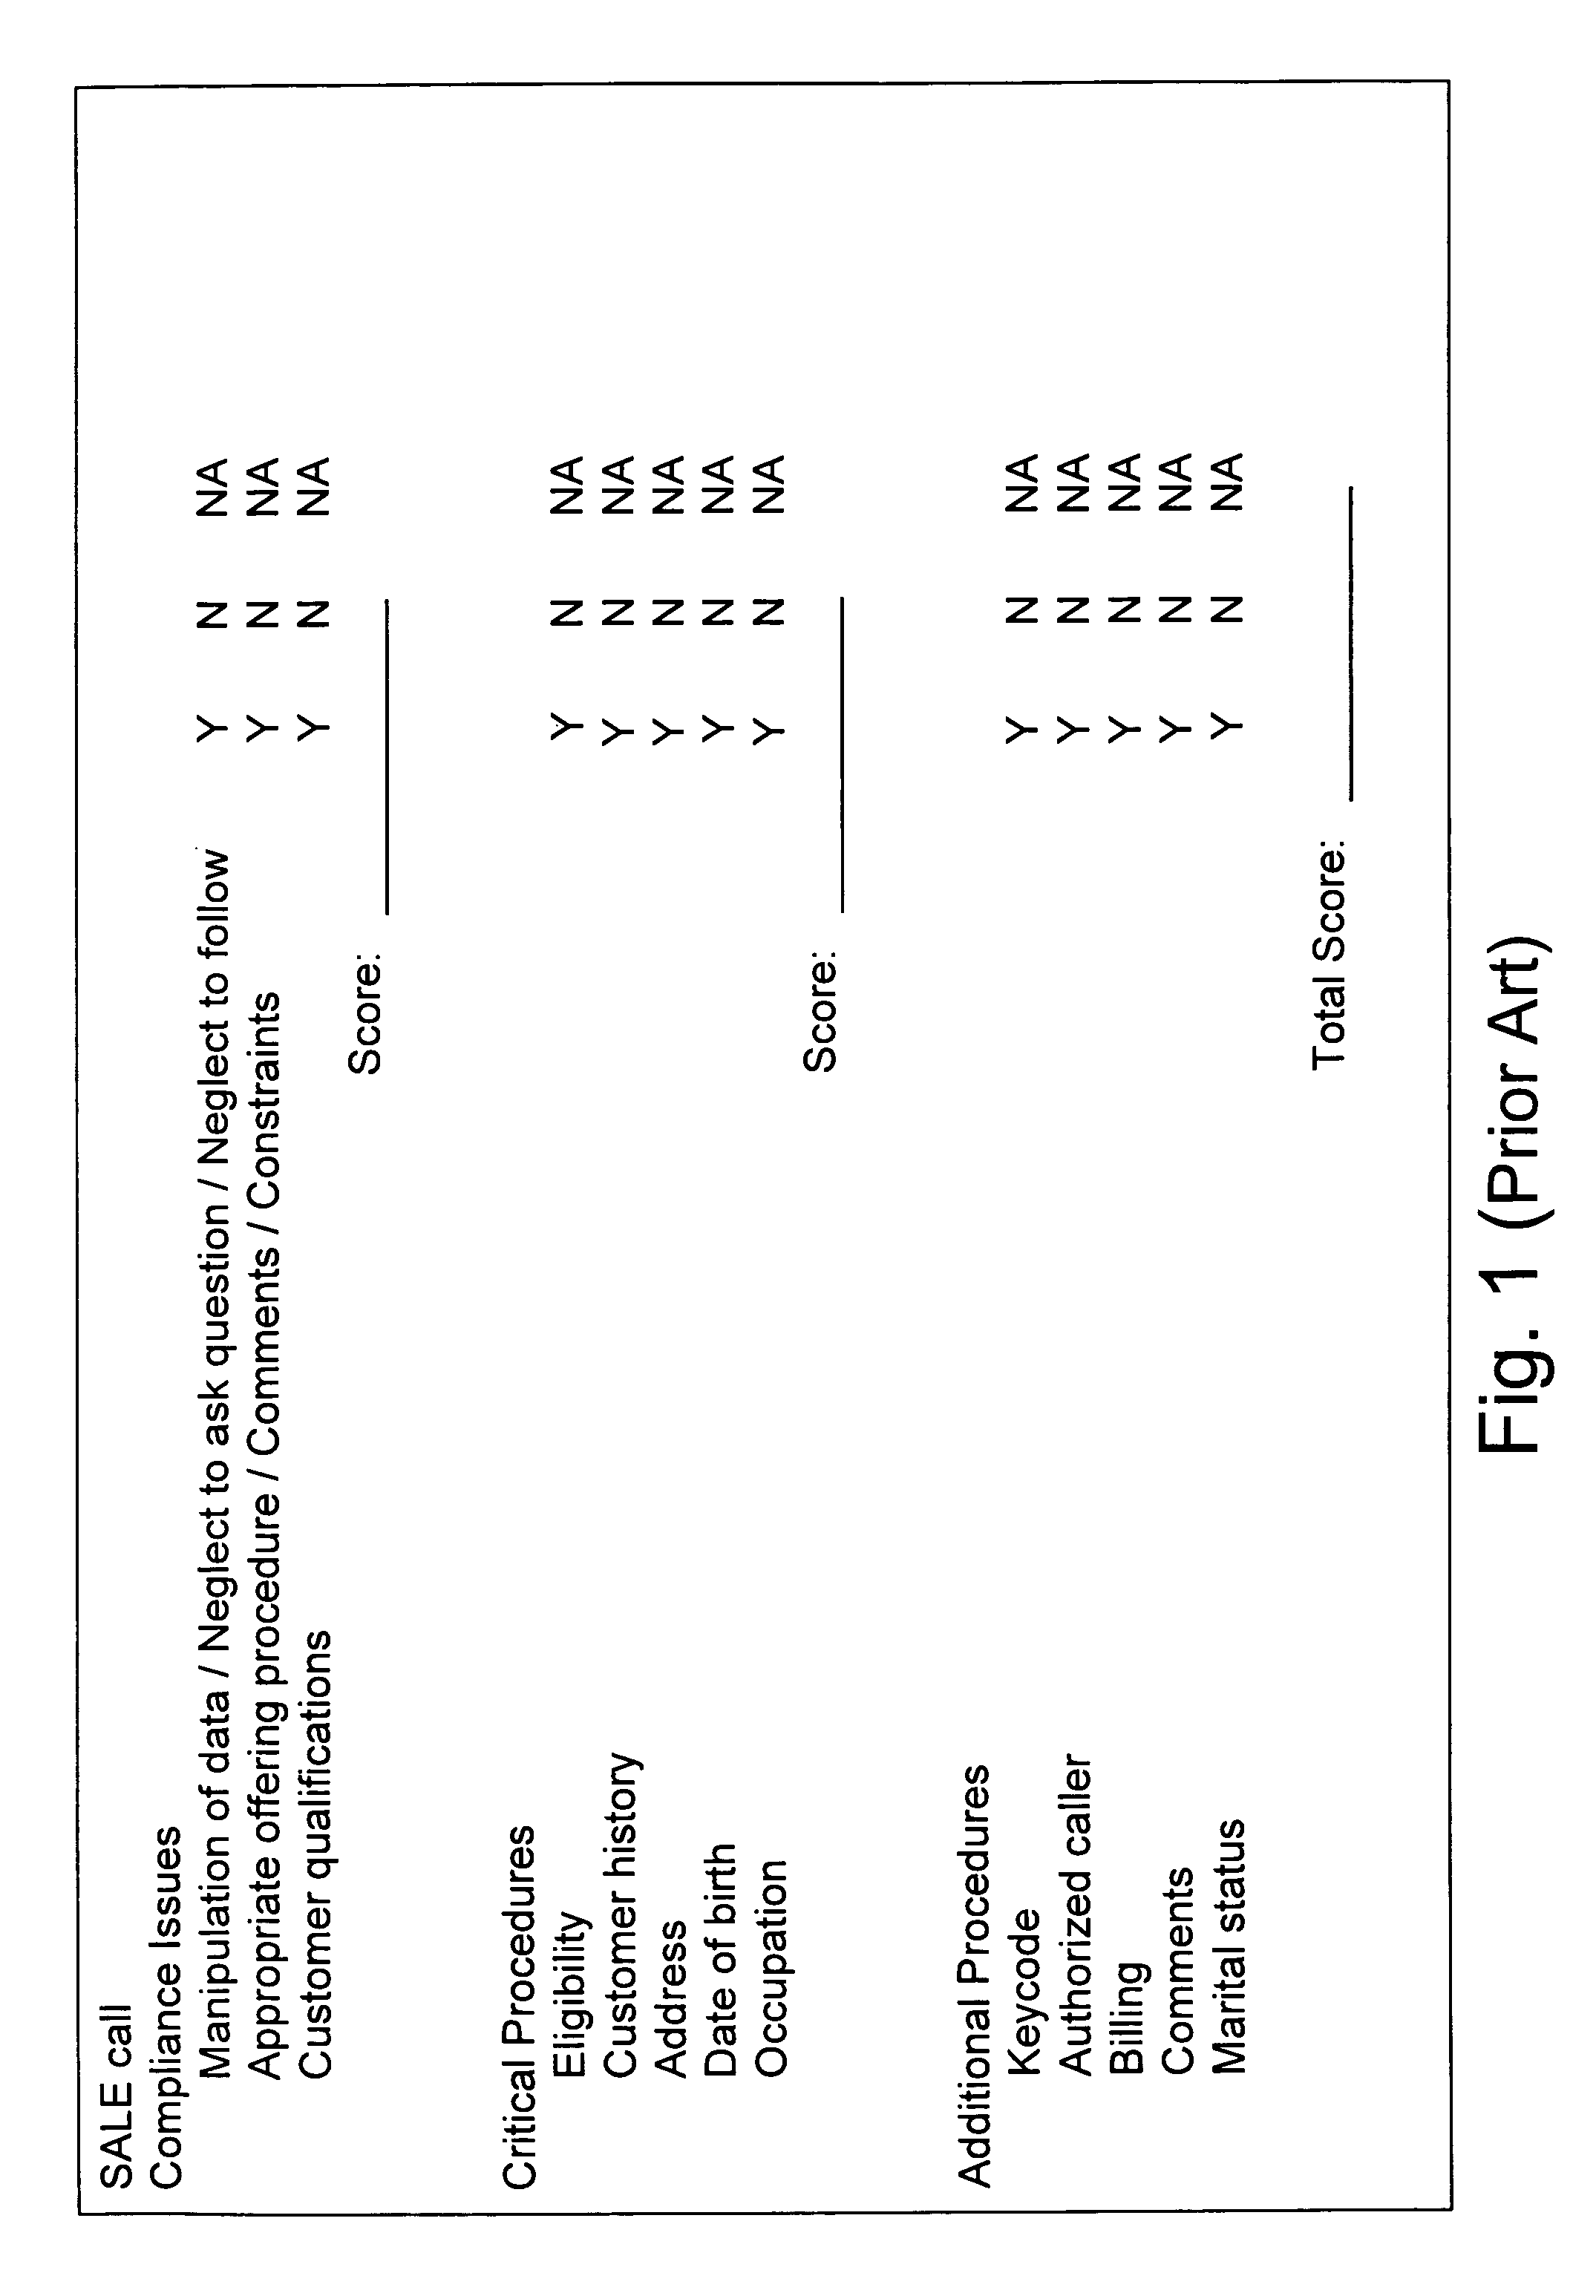 Proactive system and method for monitoring and guidance of call center agent